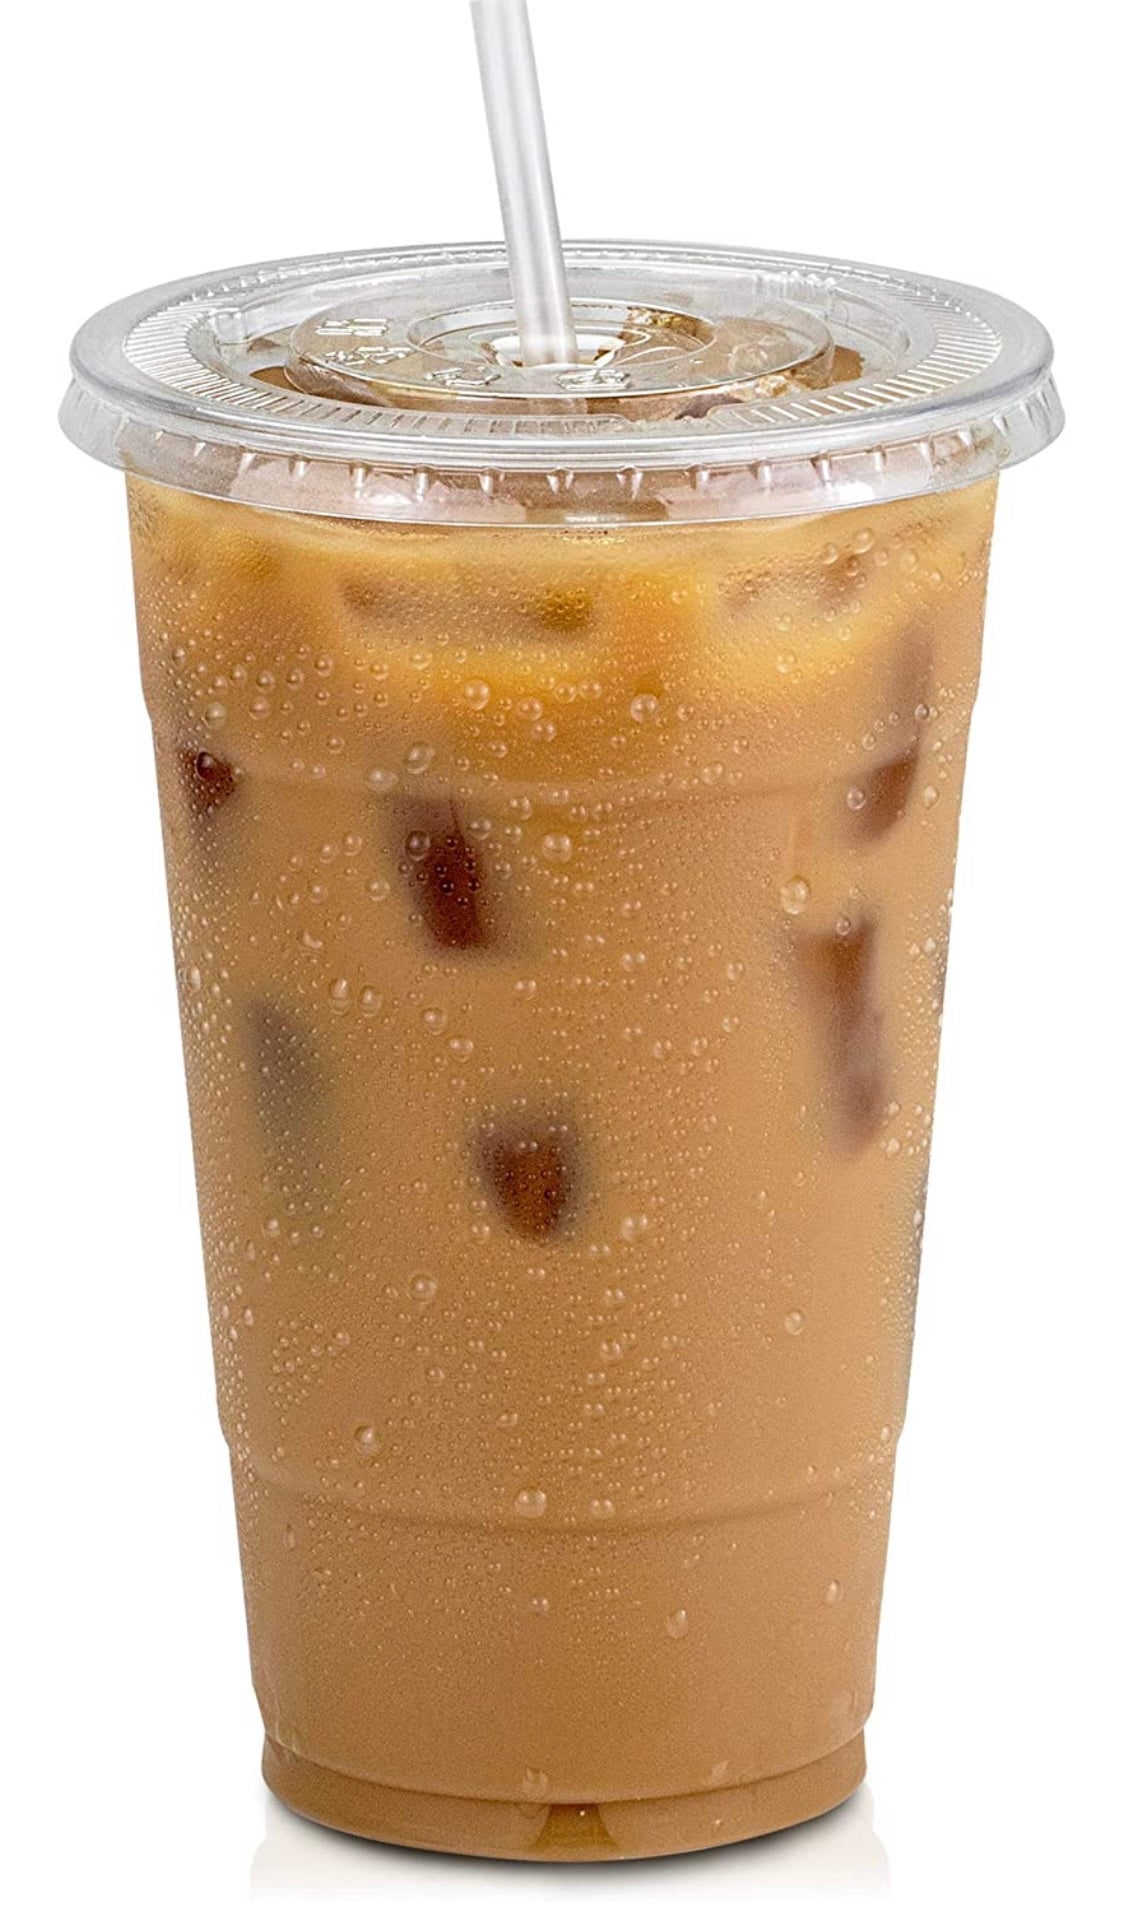 [100 Pack] 16 oz BPA Free Clear Plastic Cups with Flat Slotted Lids for Iced Cold Drinks Coffee Tea Smoothie Bubble Boba Disposable Medium Size